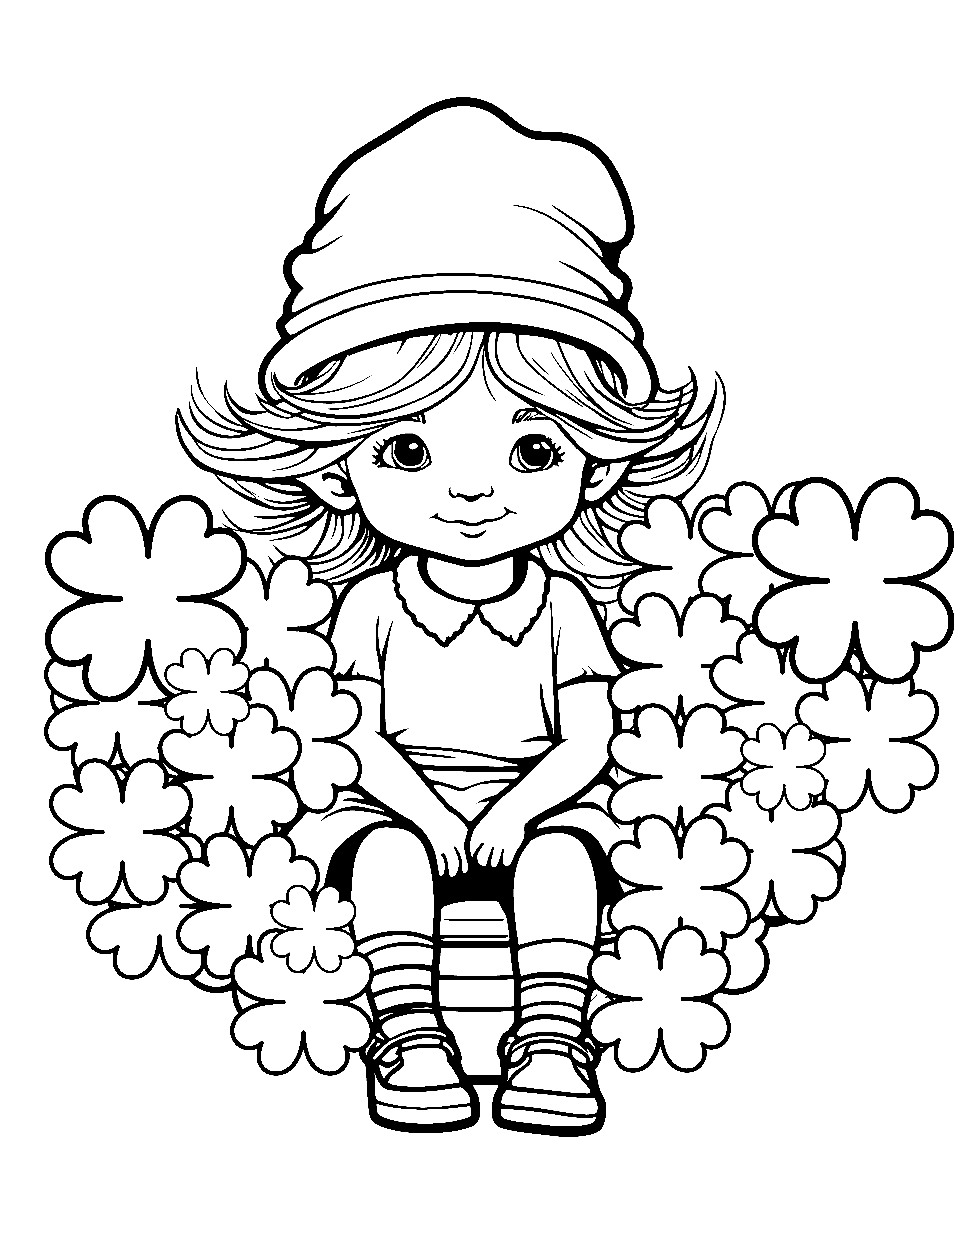 Elf Sitting on Clovers Coloring Page - An elf taking a break, seated comfortably on giant shamrocks.